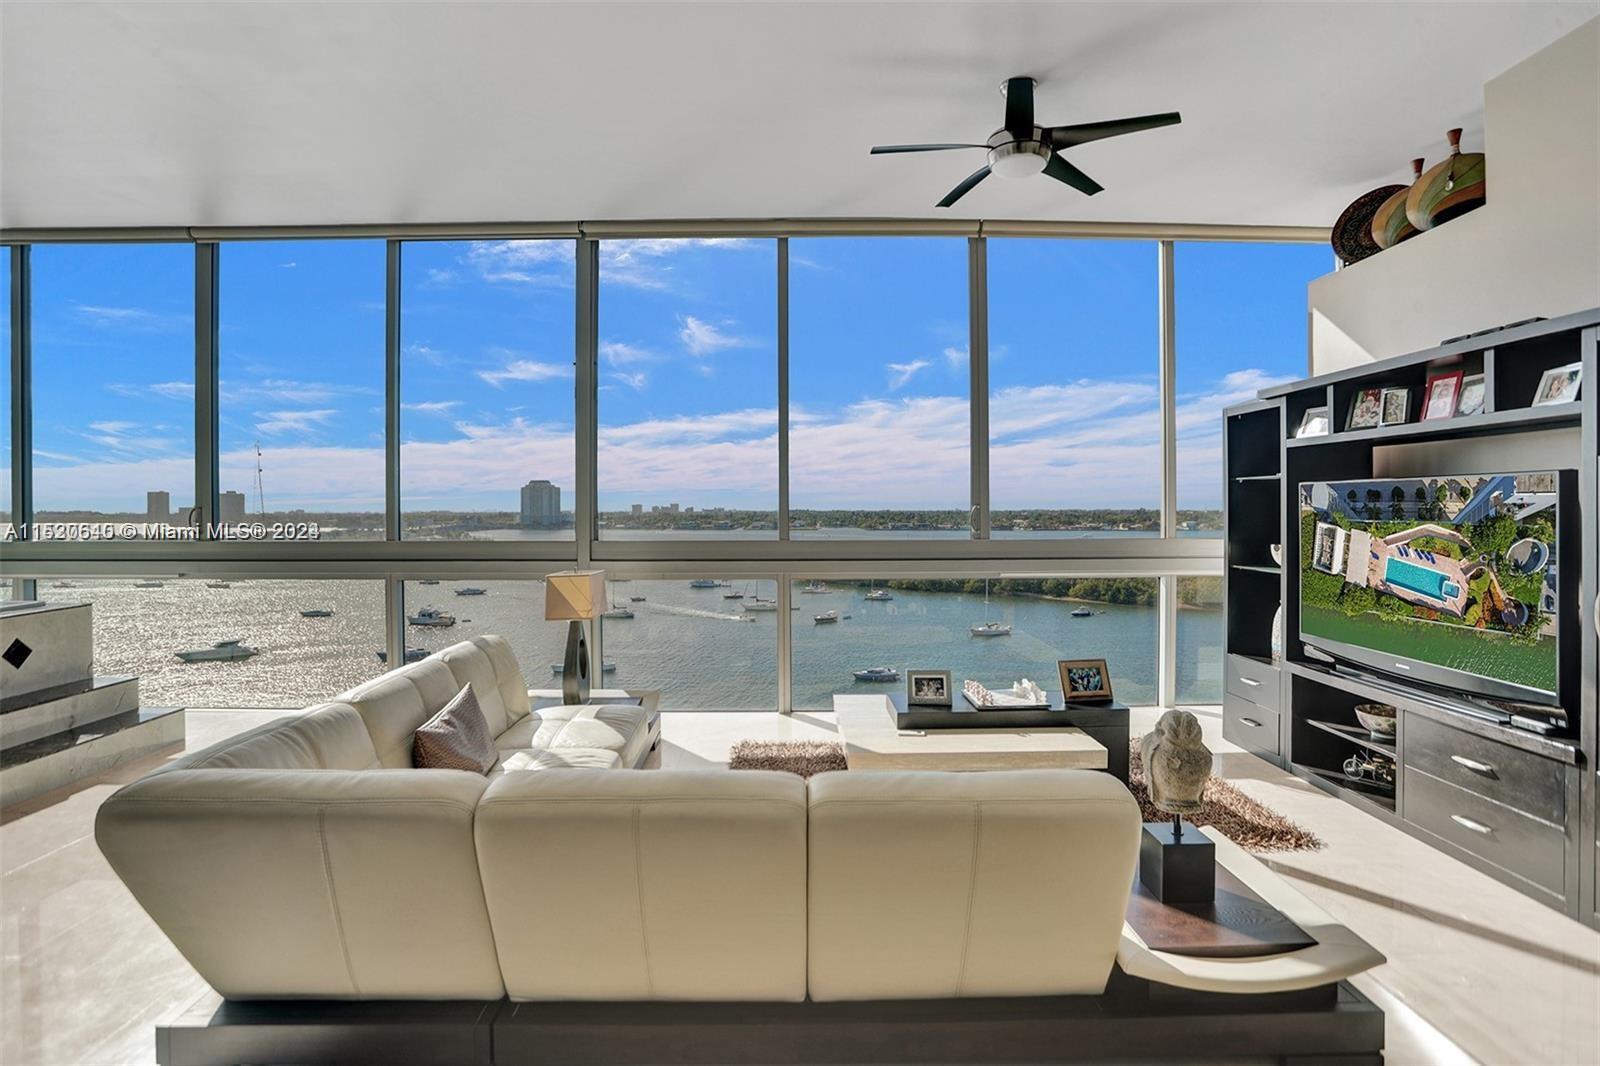 Stunning Waterfront Bay Views from the 9th Floor in North Bay Village Harbor Island.  10+ High Ceili